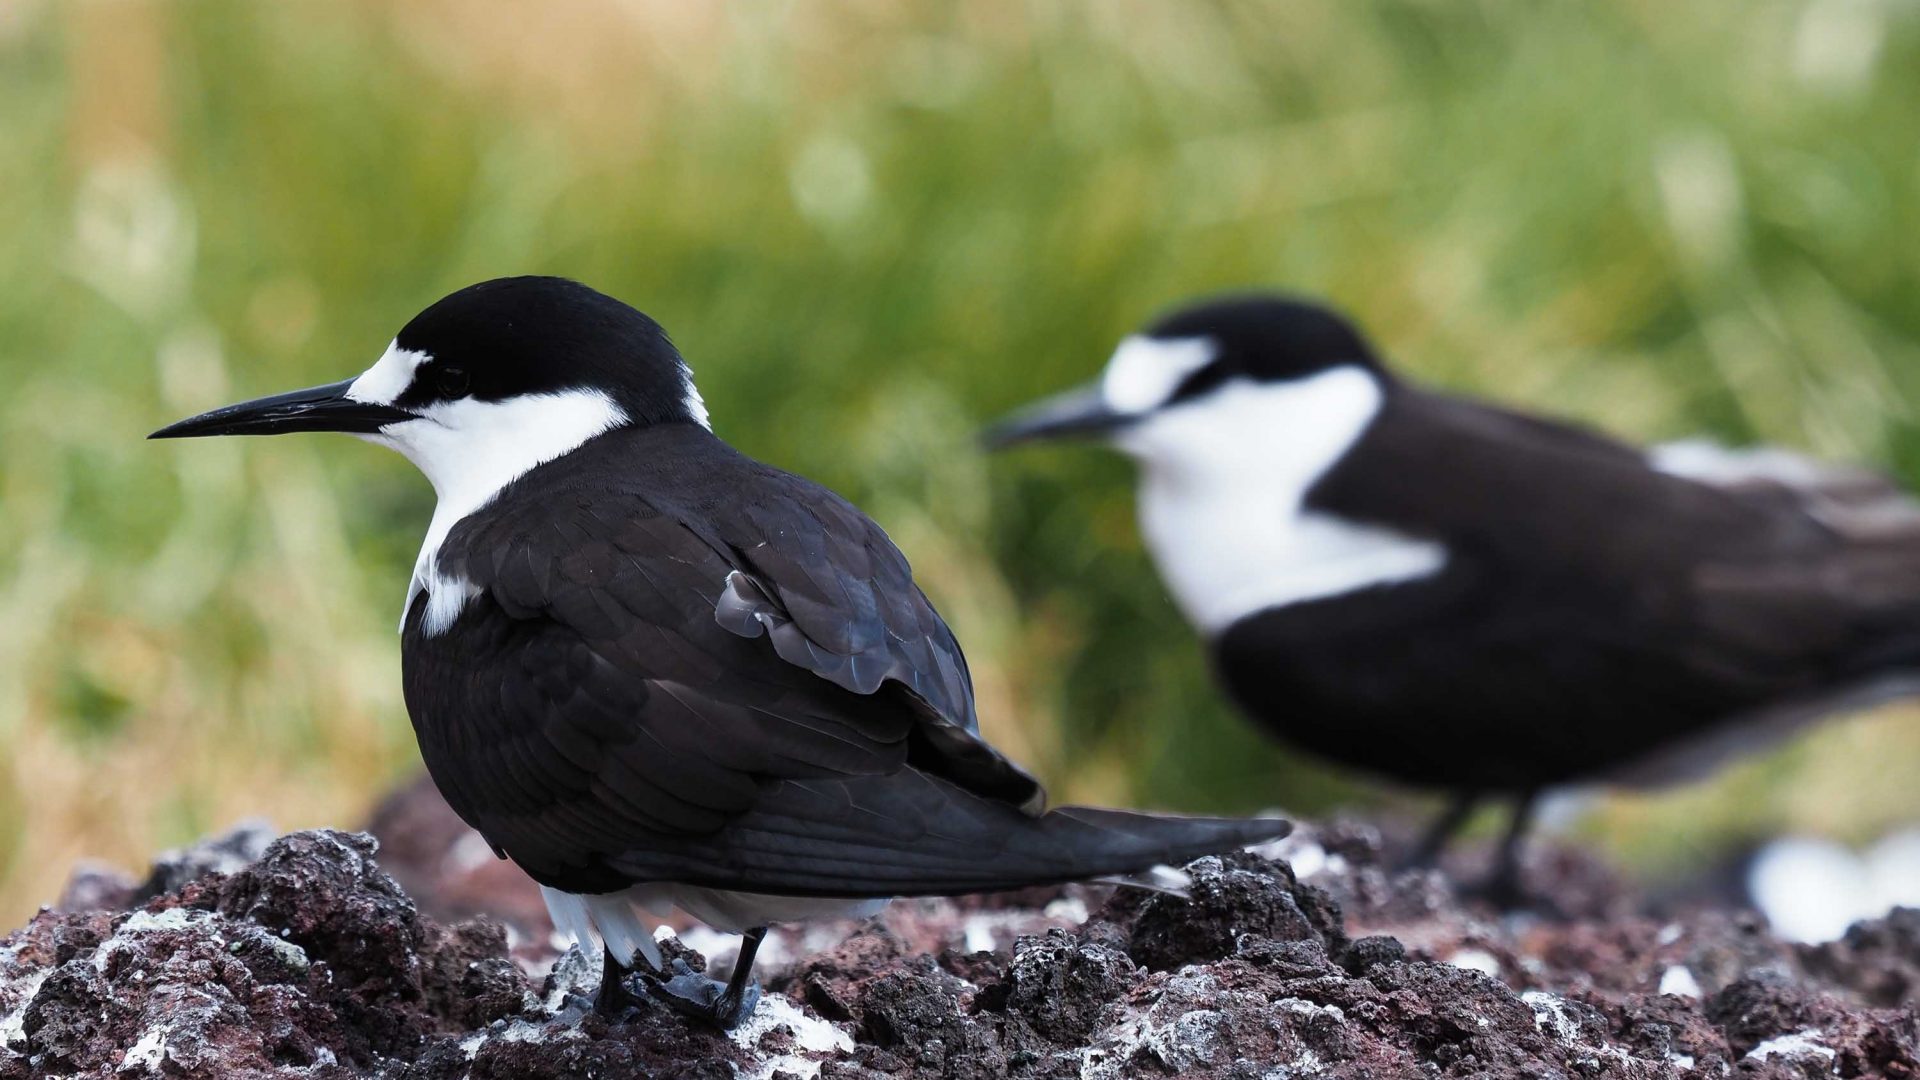 Two black and white birds.